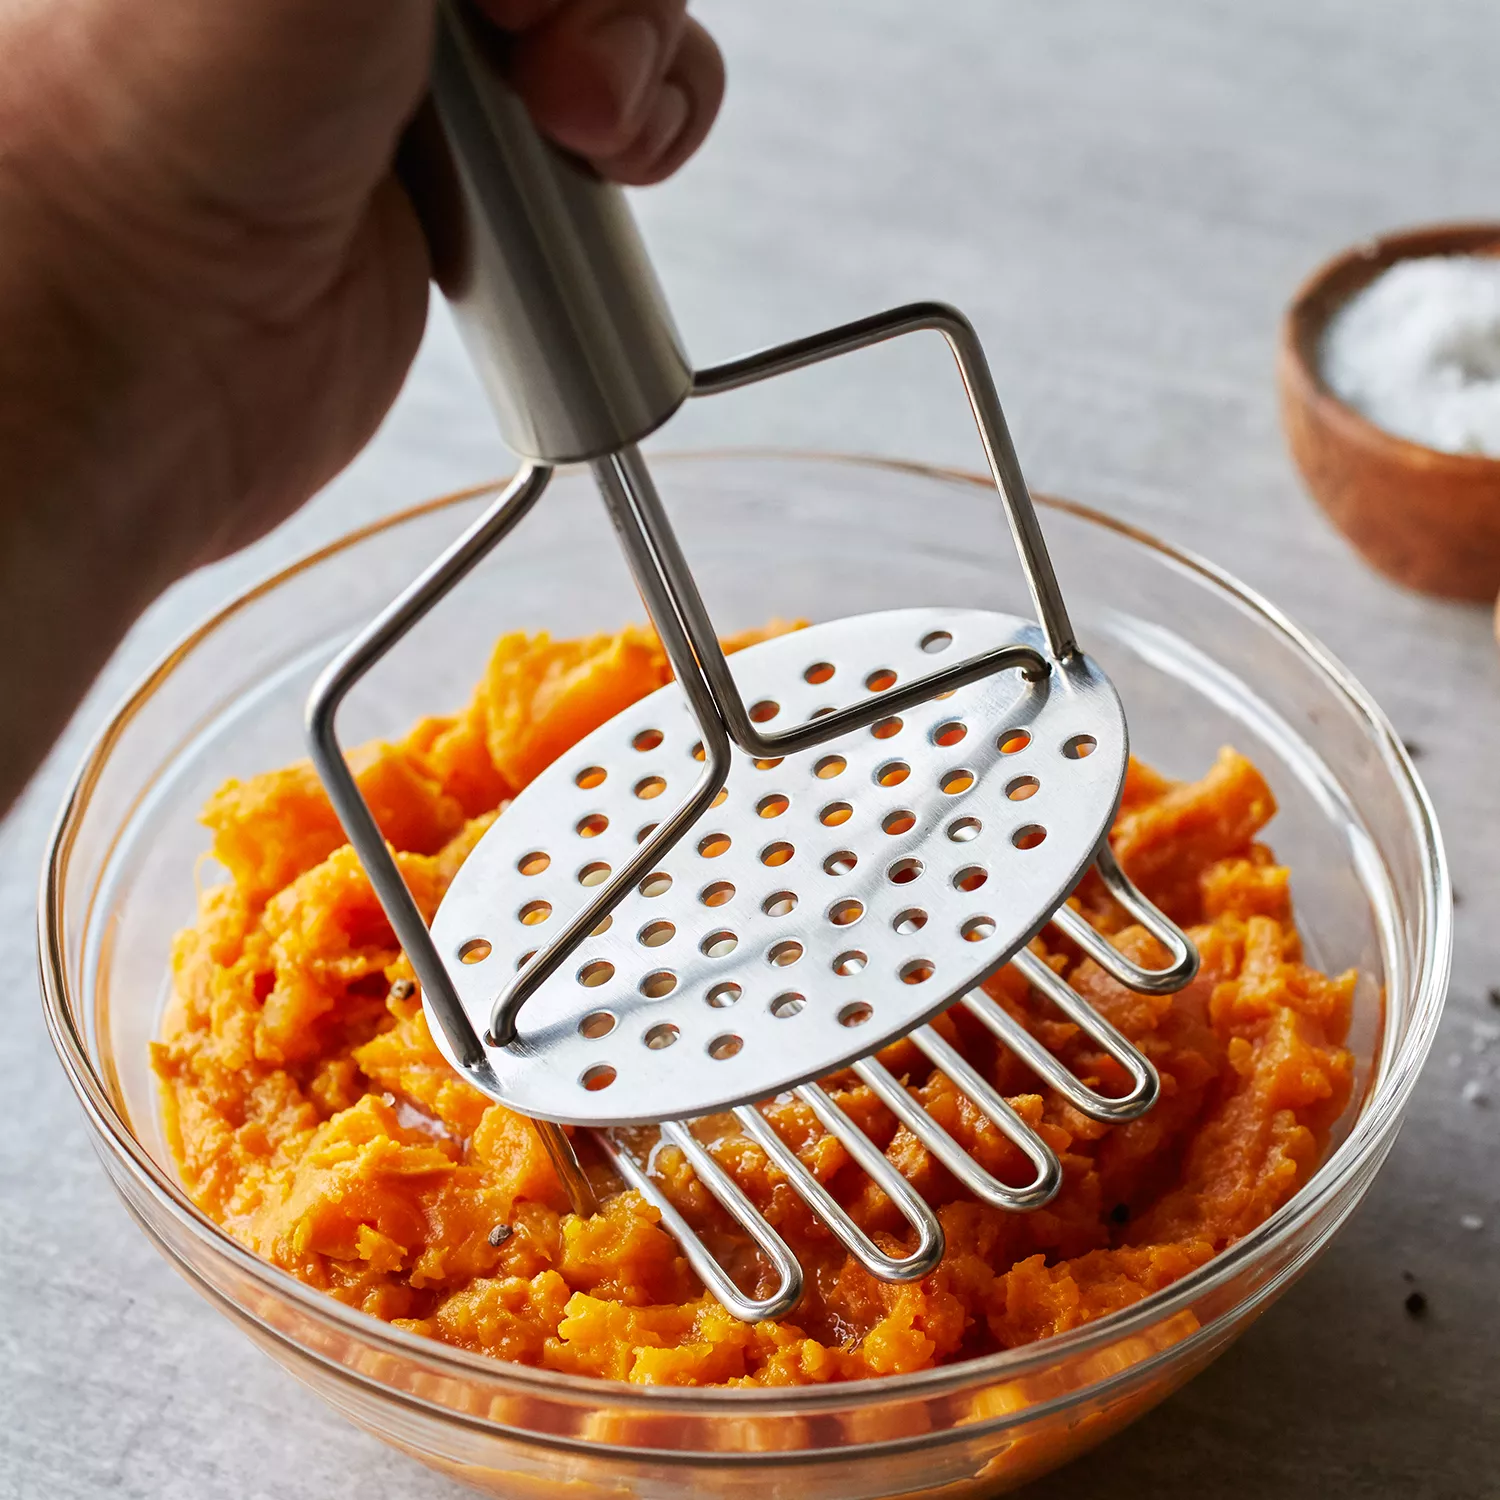 Dual Action Potato Masher - The Peppermill